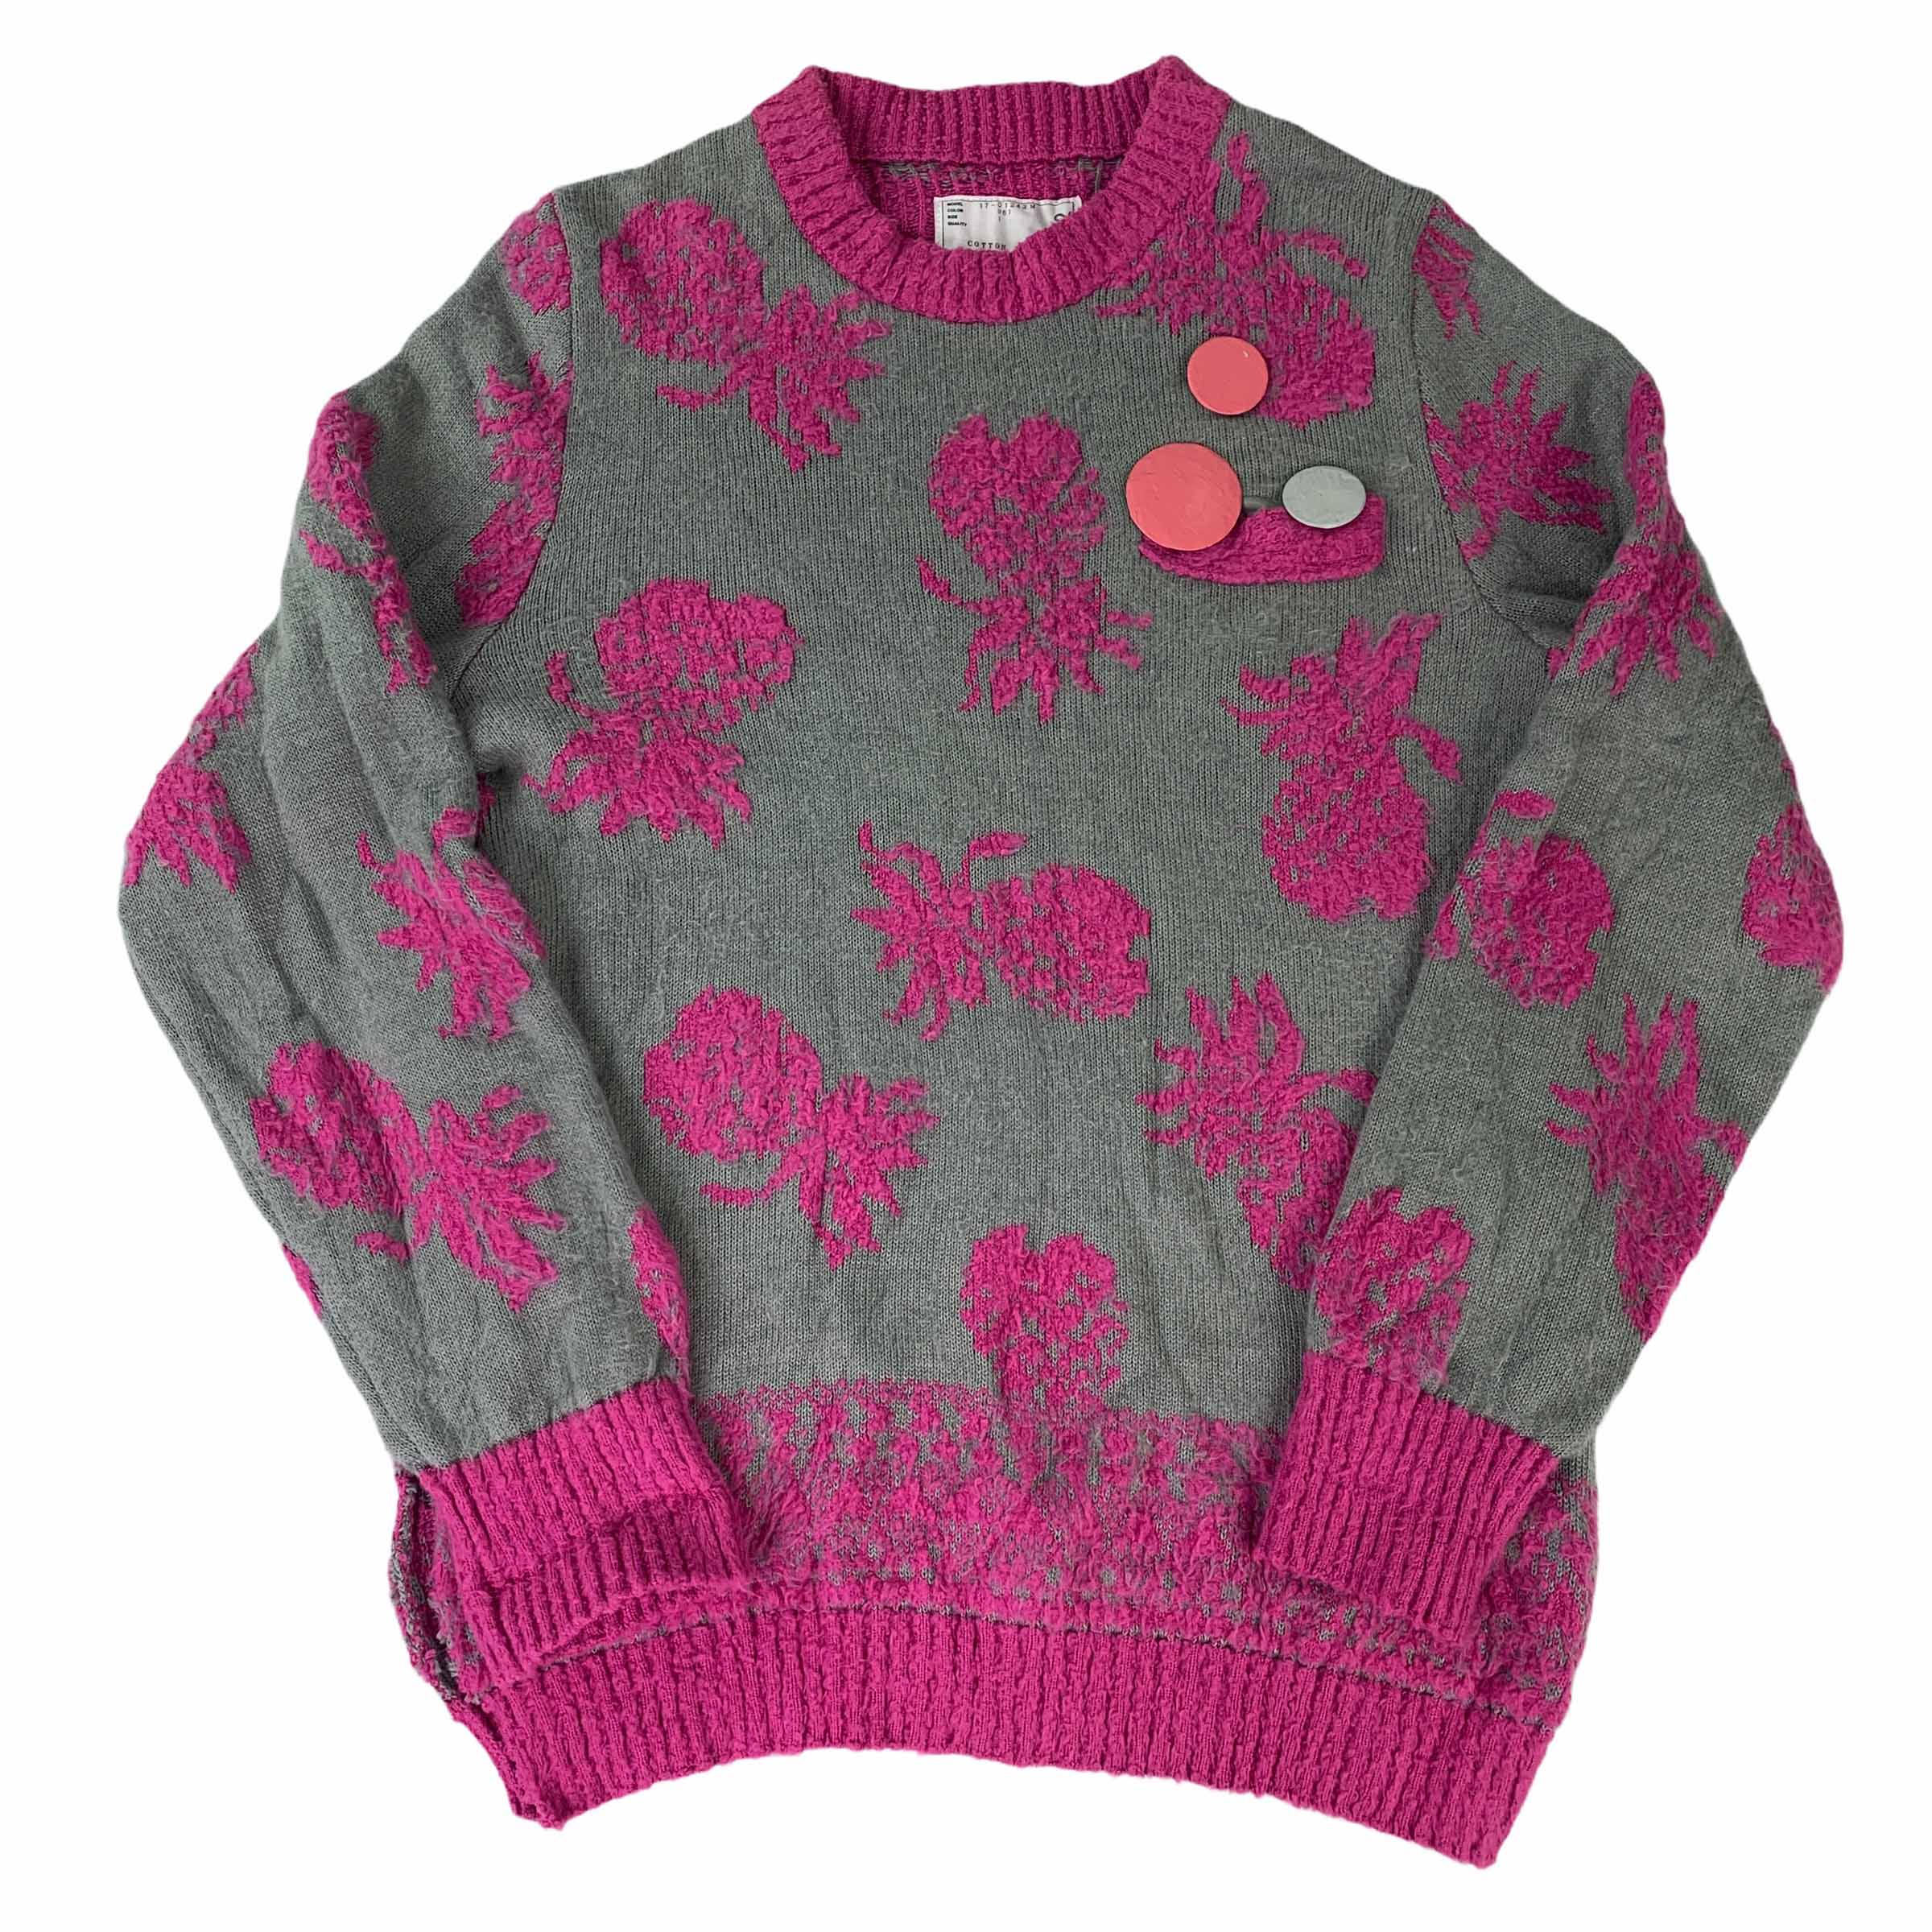 [Sacai] Badge Point Octopus Knit GR- Size 1